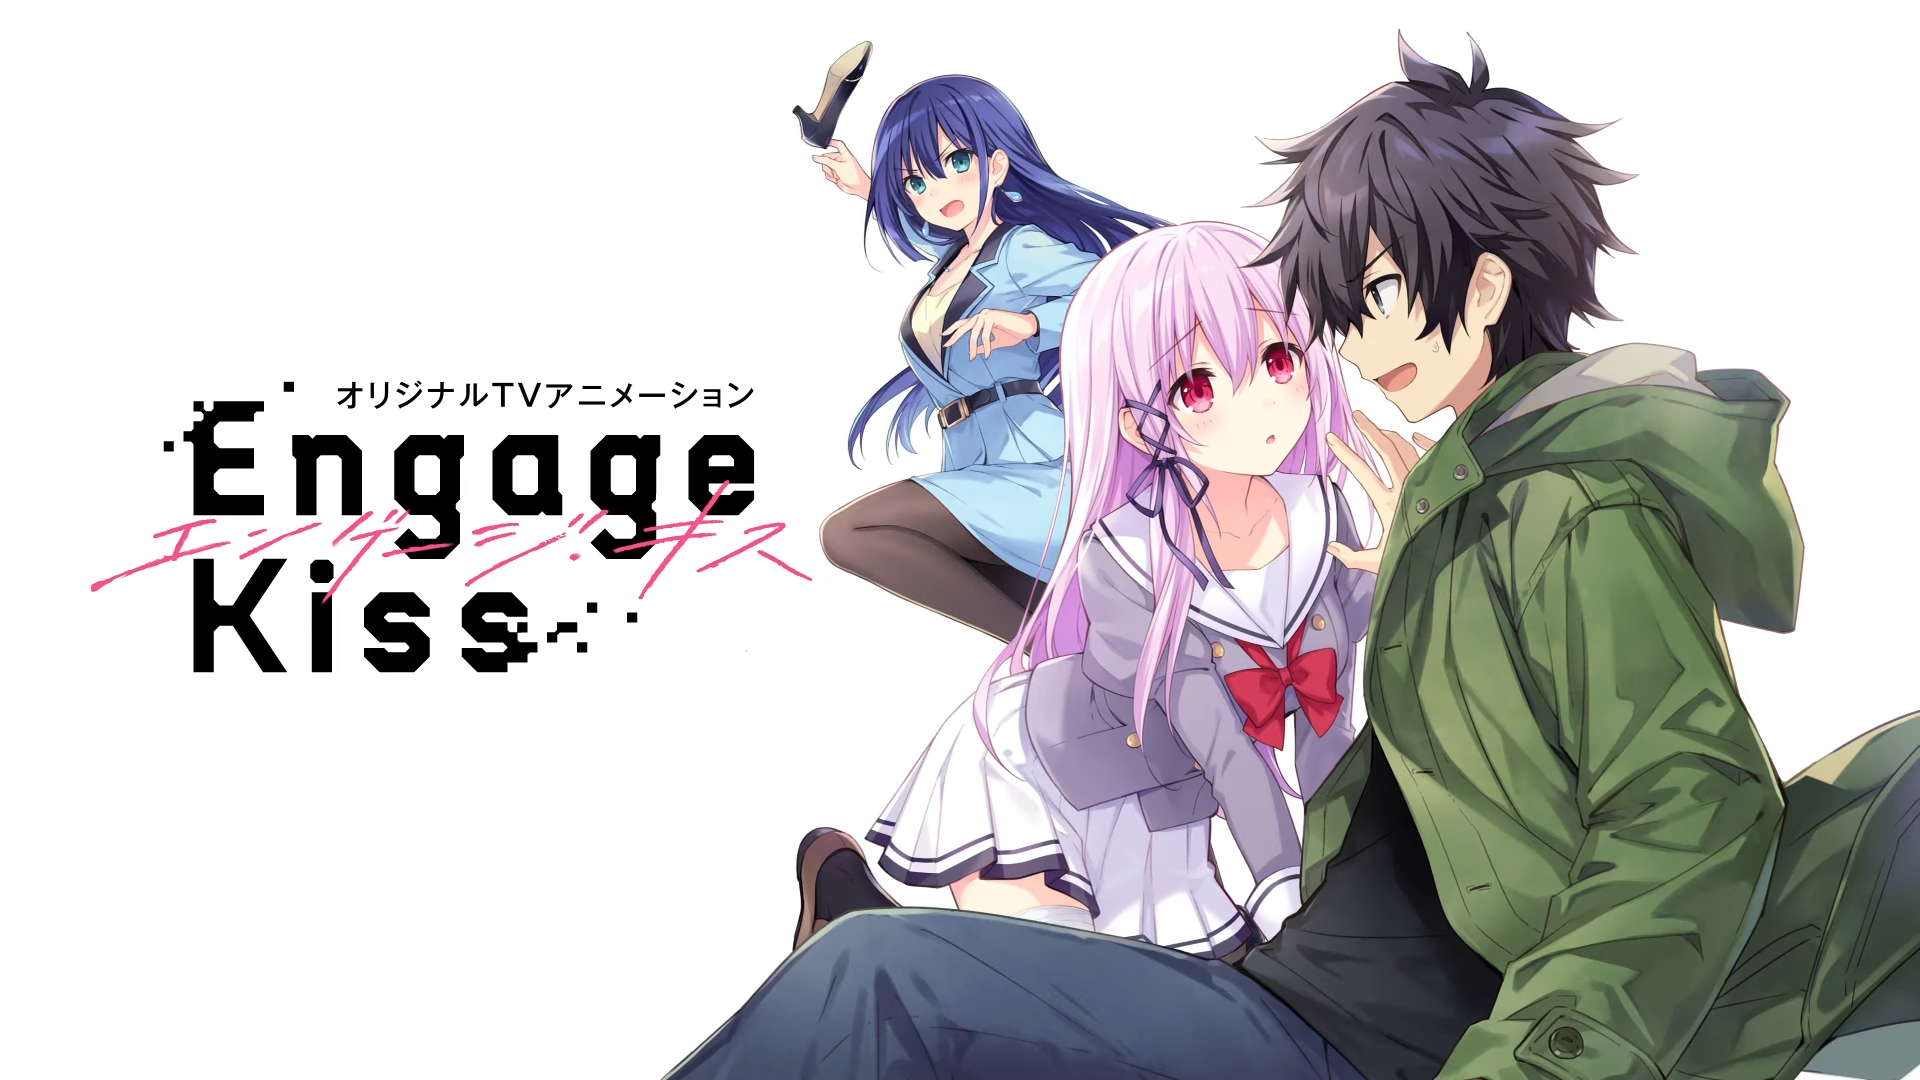 Engage Kiss Original Anime by A-1 Pictures Set for July 2022 Release